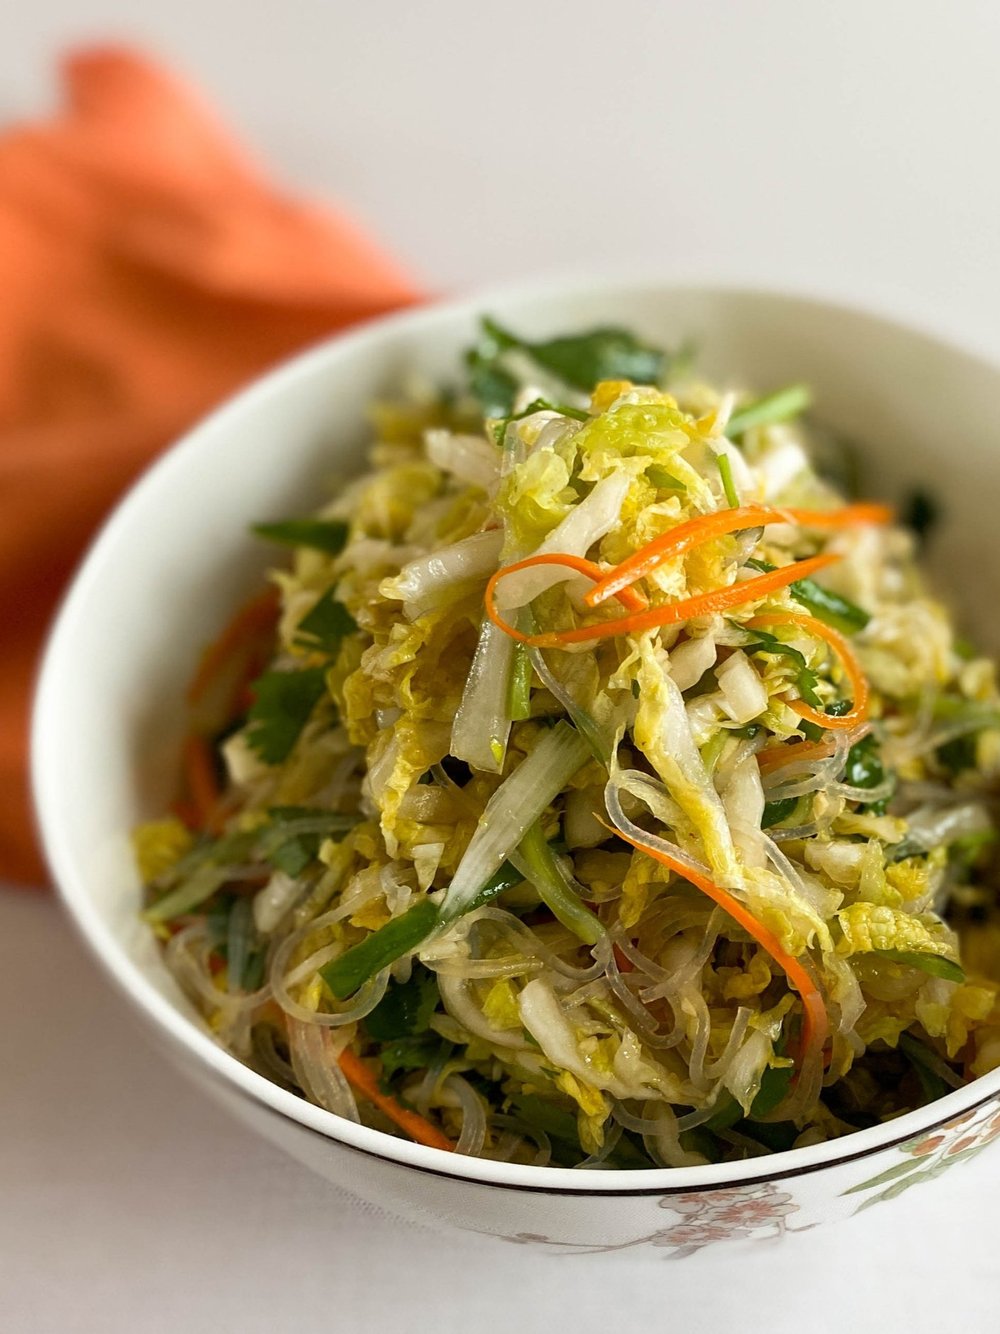 Hannah Che's Napa Cabbage and Vermicelli Salad